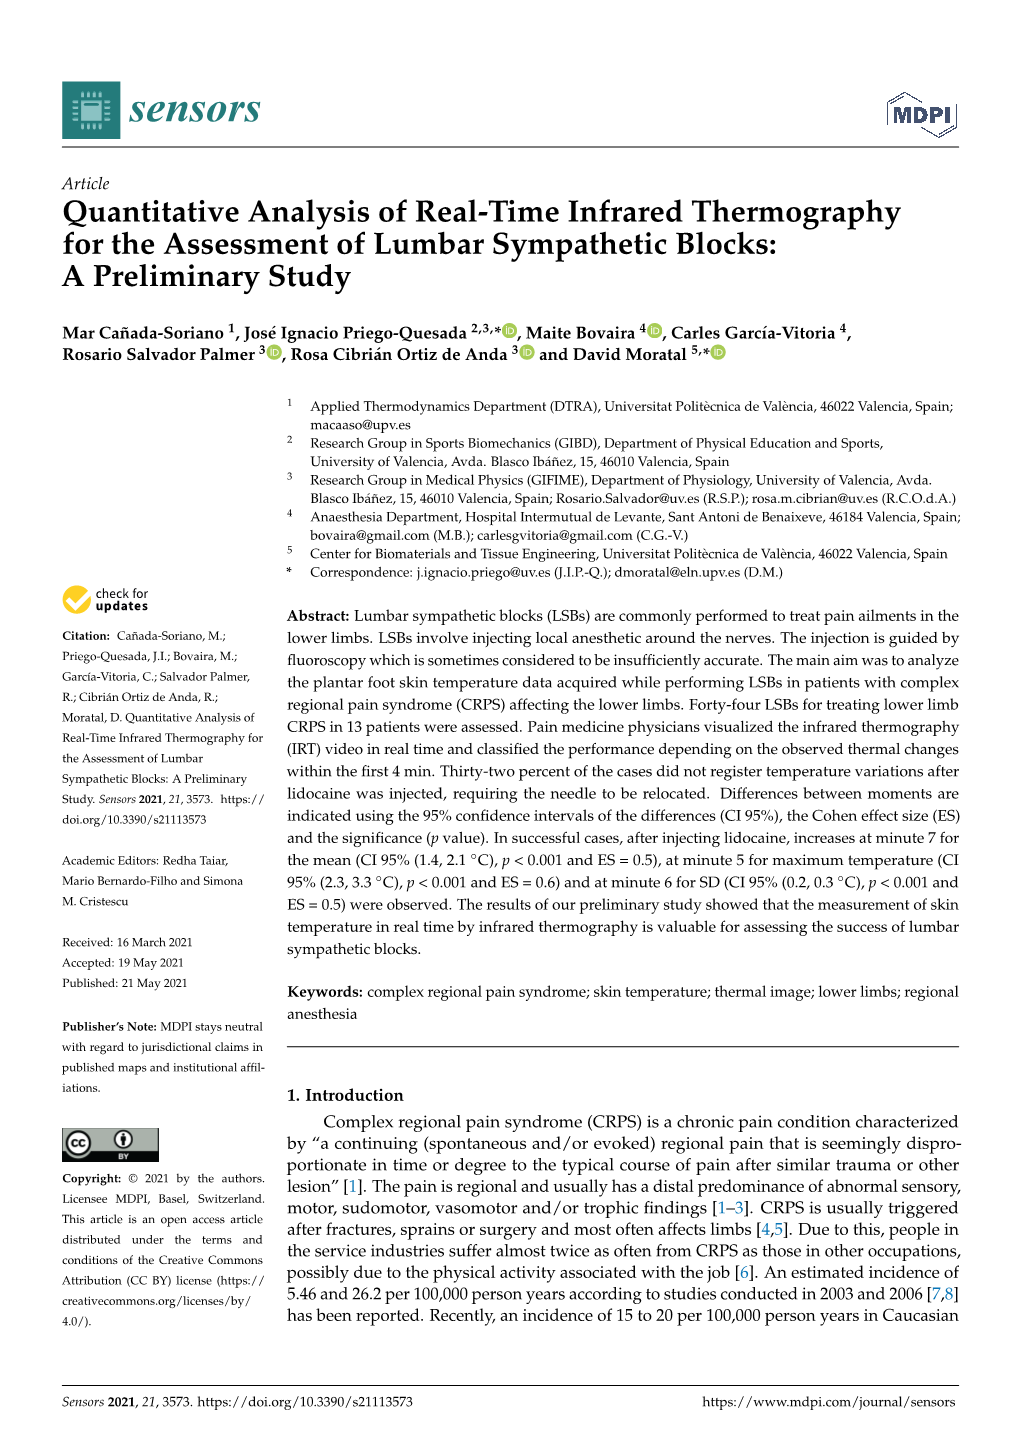 Quantitative Analysis of Real-Time Infrared Thermography for the Assessment of Lumbar Sympathetic Blocks: a Preliminary Study